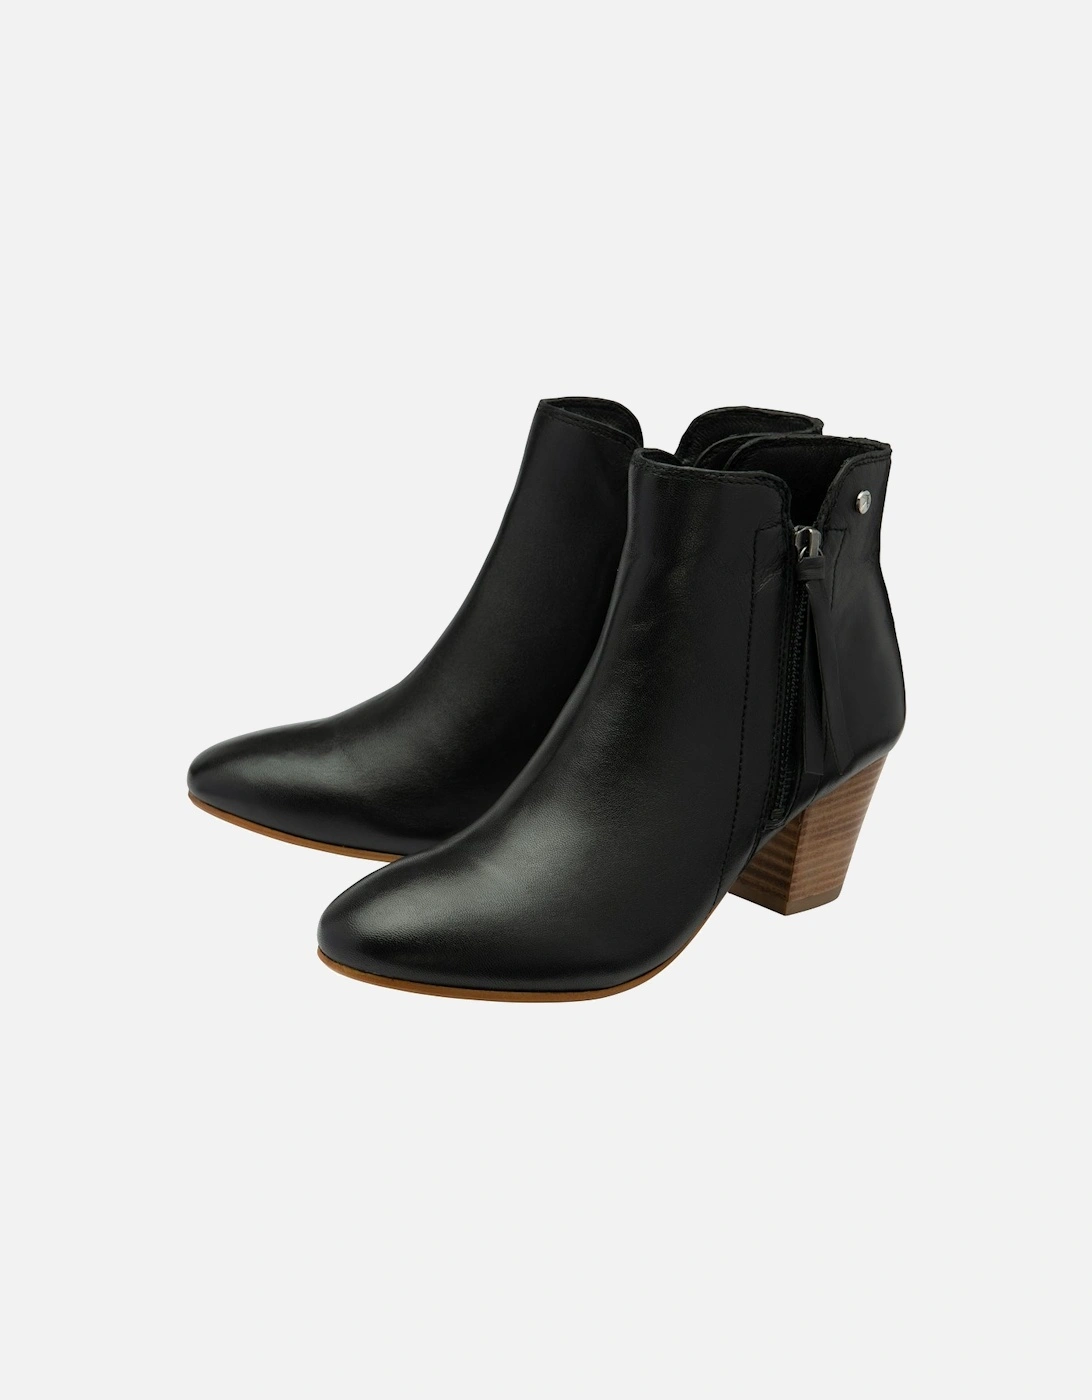 Tulli Womens Ankle Boots